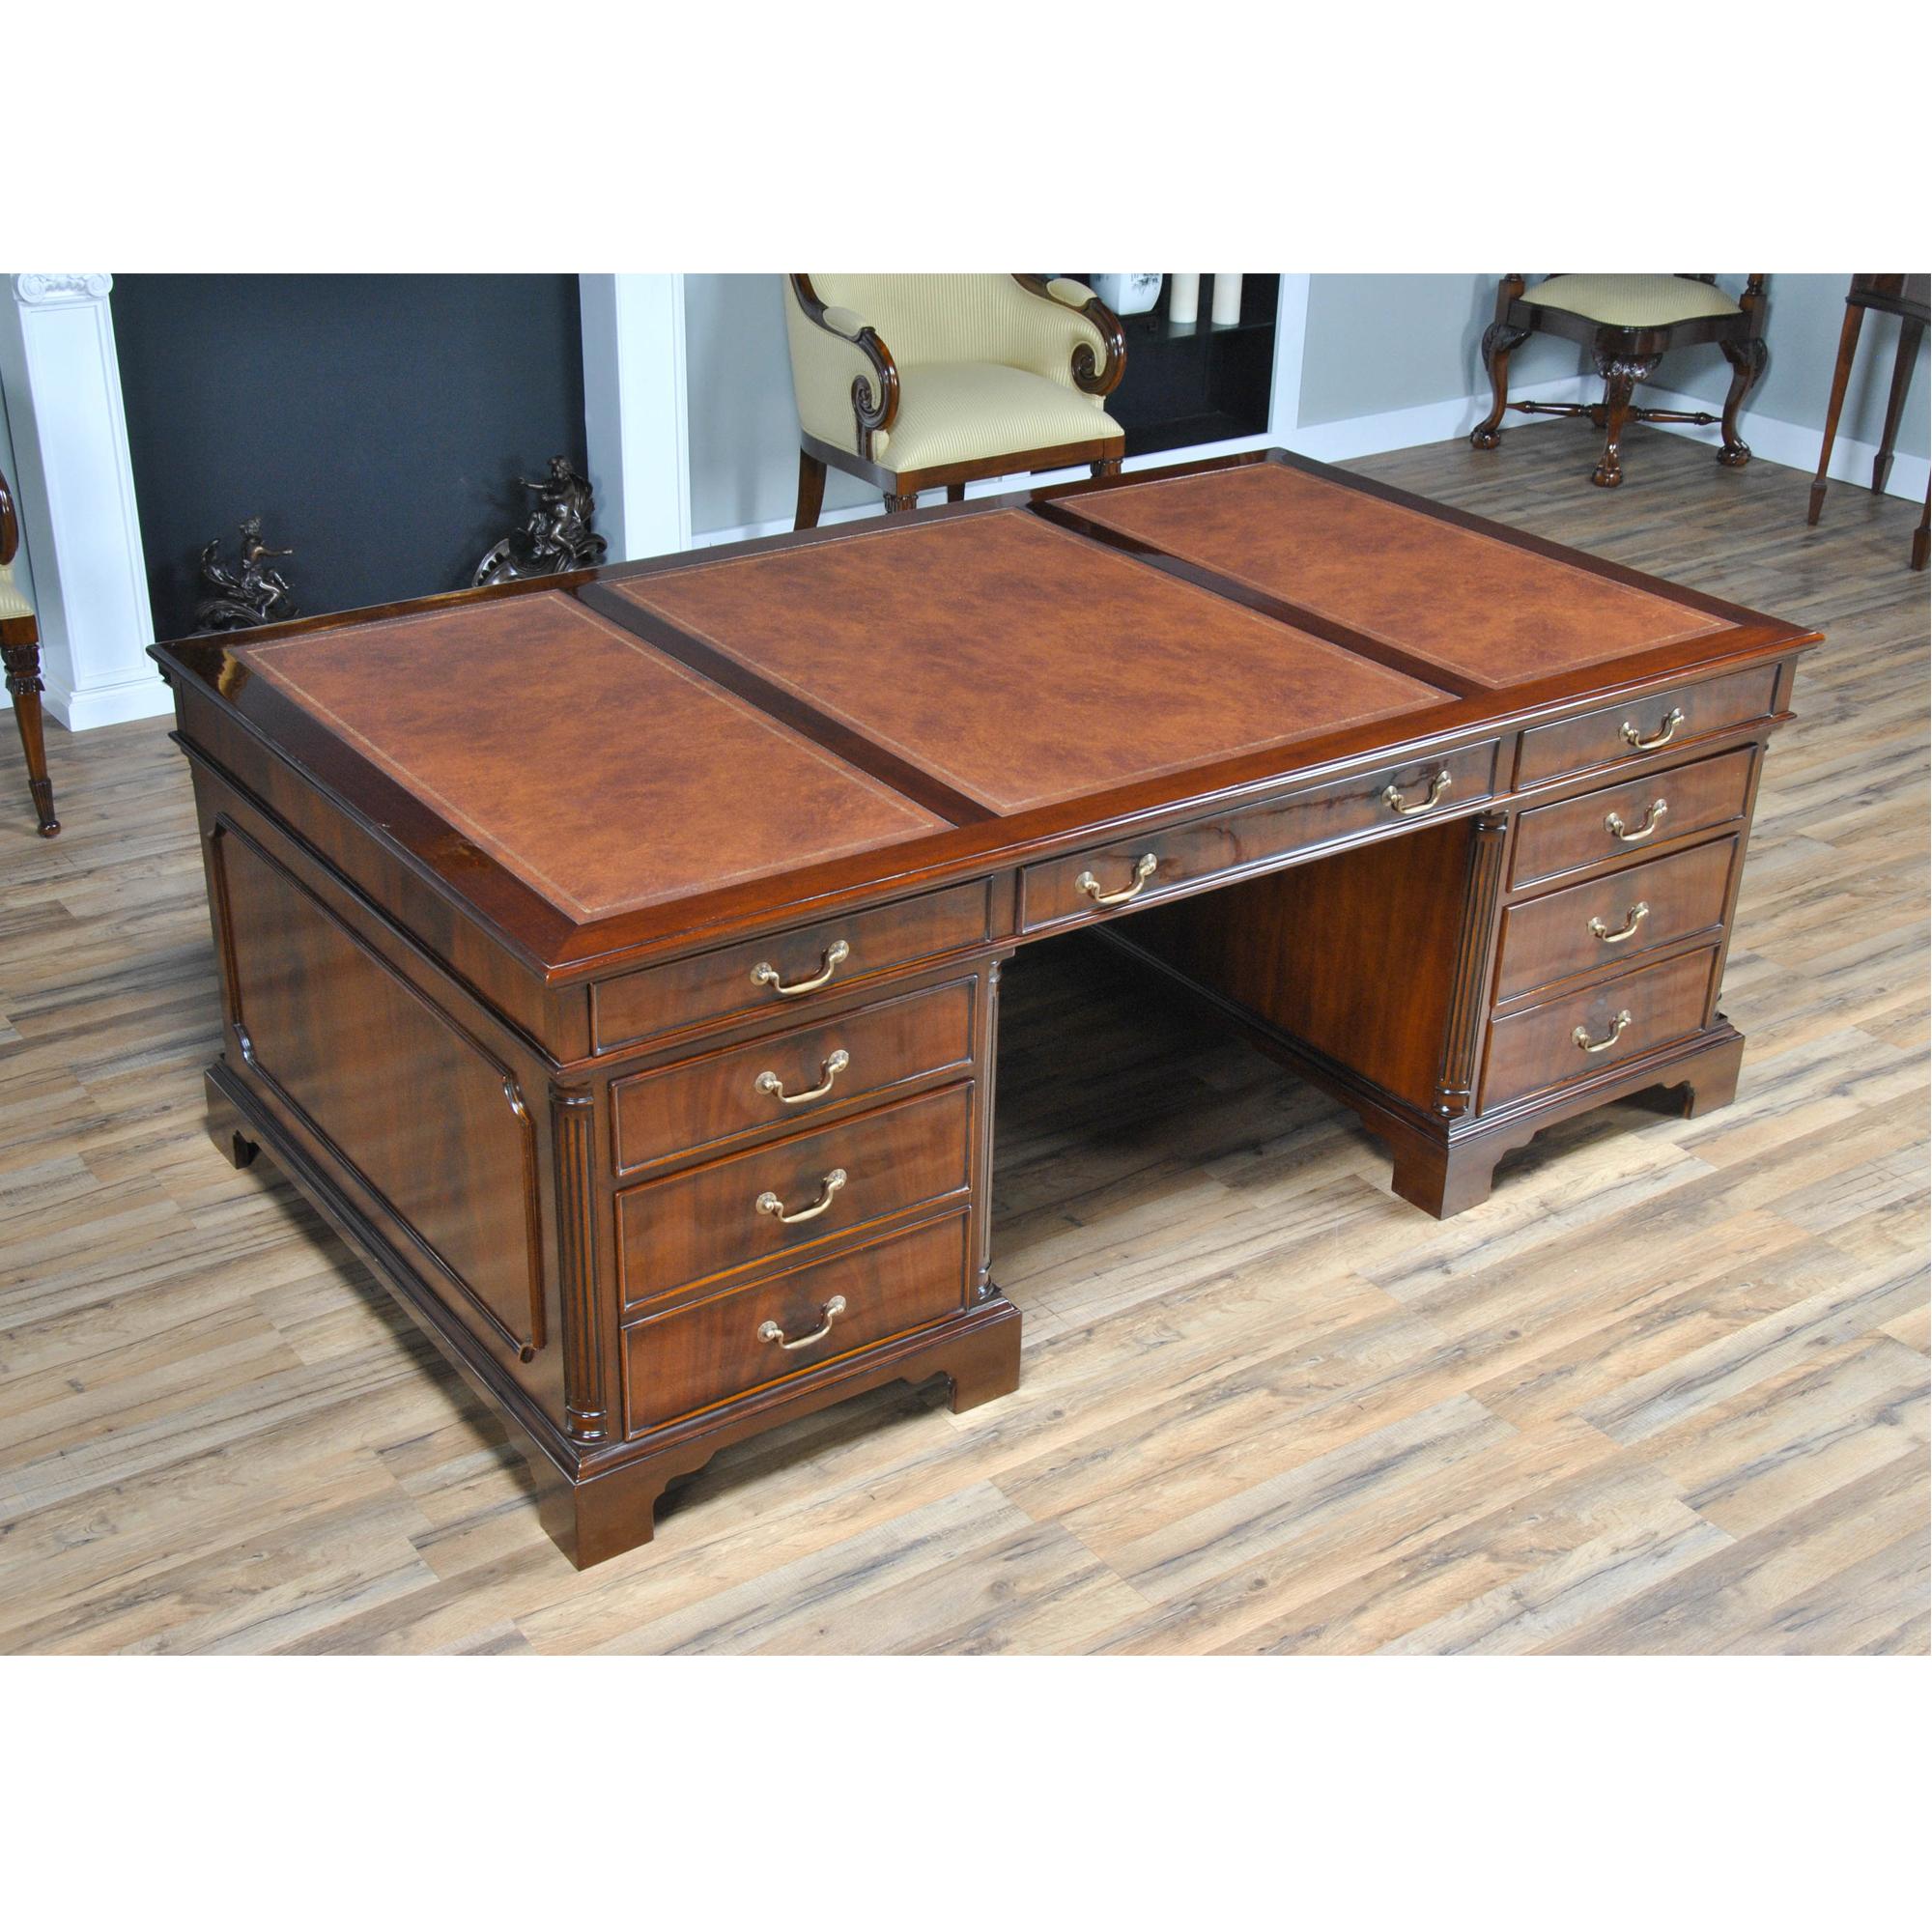 This is the Huge Partners Desk in the Niagara Furniture collection. This desk behemoth matches a number of other pieces which we produce. The fantastic solid mahogany top frame is inset with three genuine, full grain leather panels, each tooled with